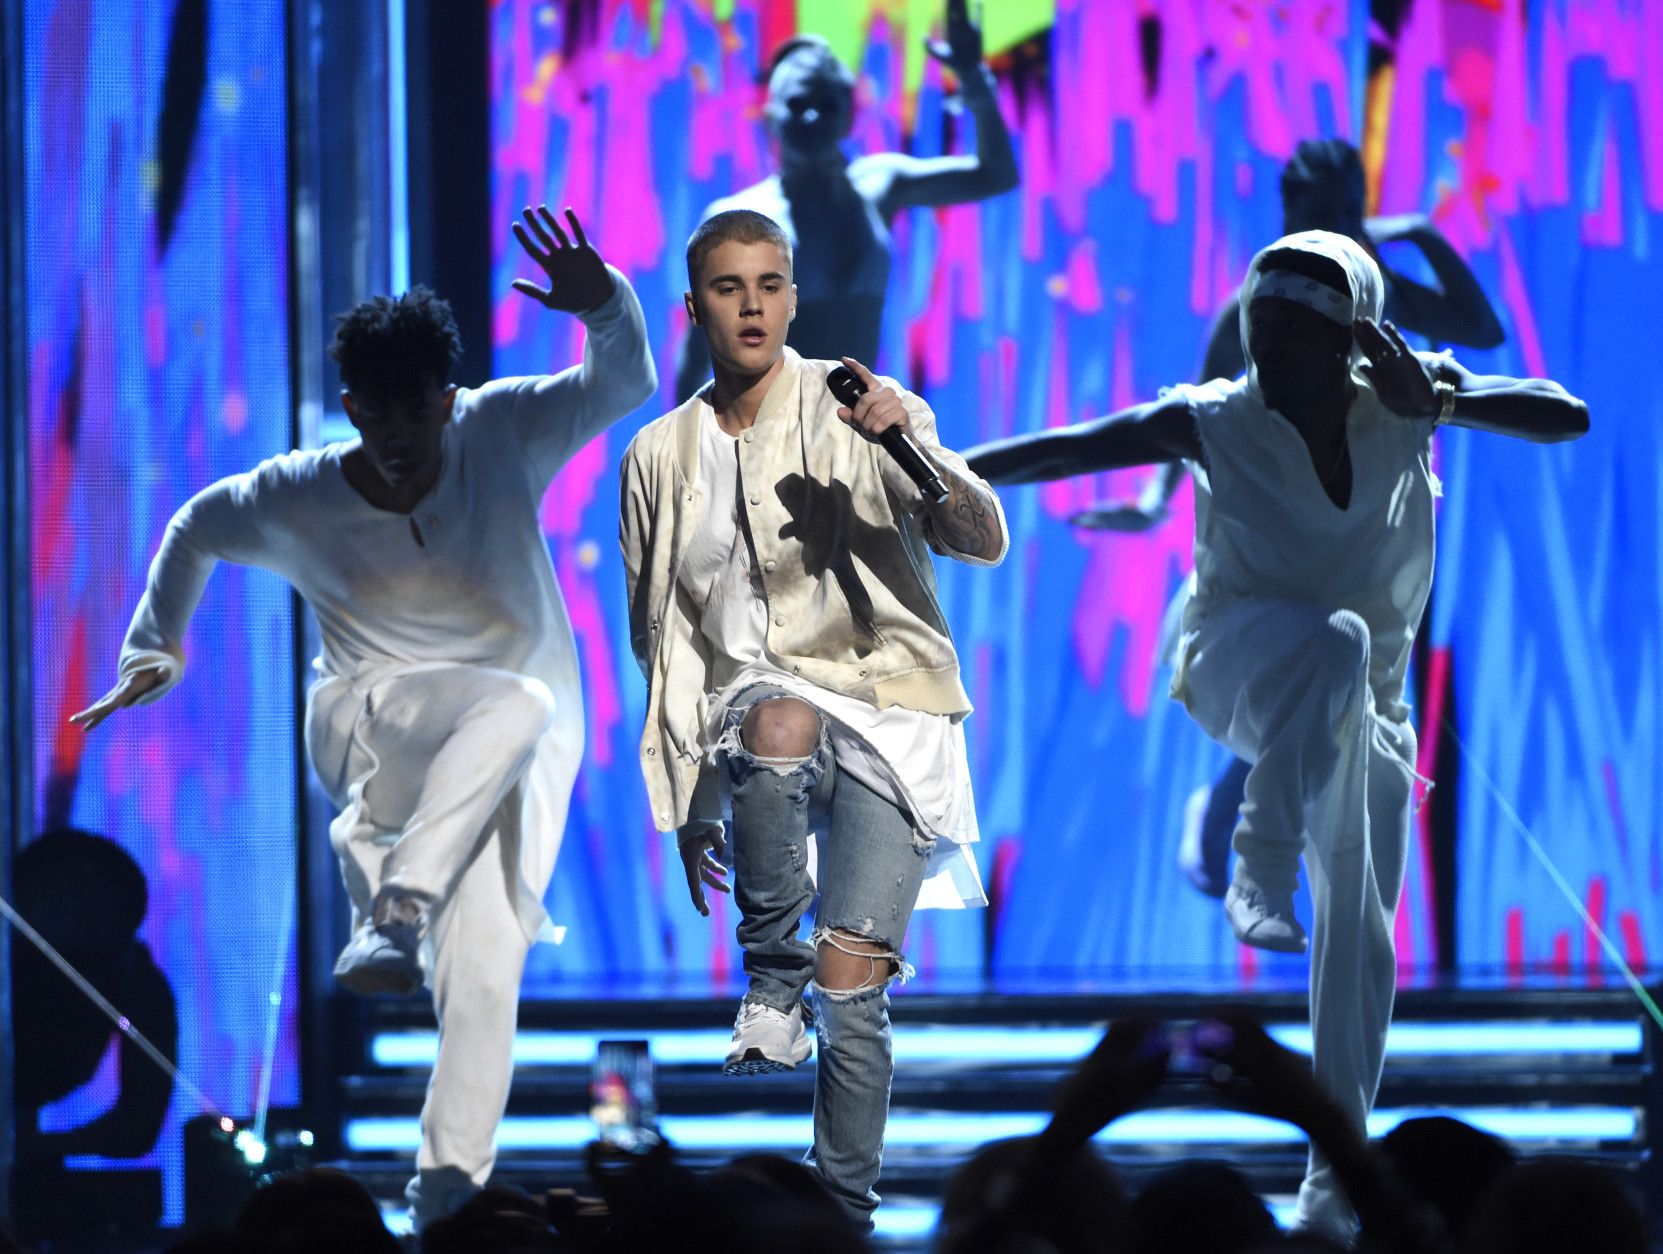 Justin Bieber performs at the Billboard Music Awards at the T-Mobile Arena on Sunday, May 22, 2016, in Las Vegas. (Photo by Chris Pizzello/Invision/AP)